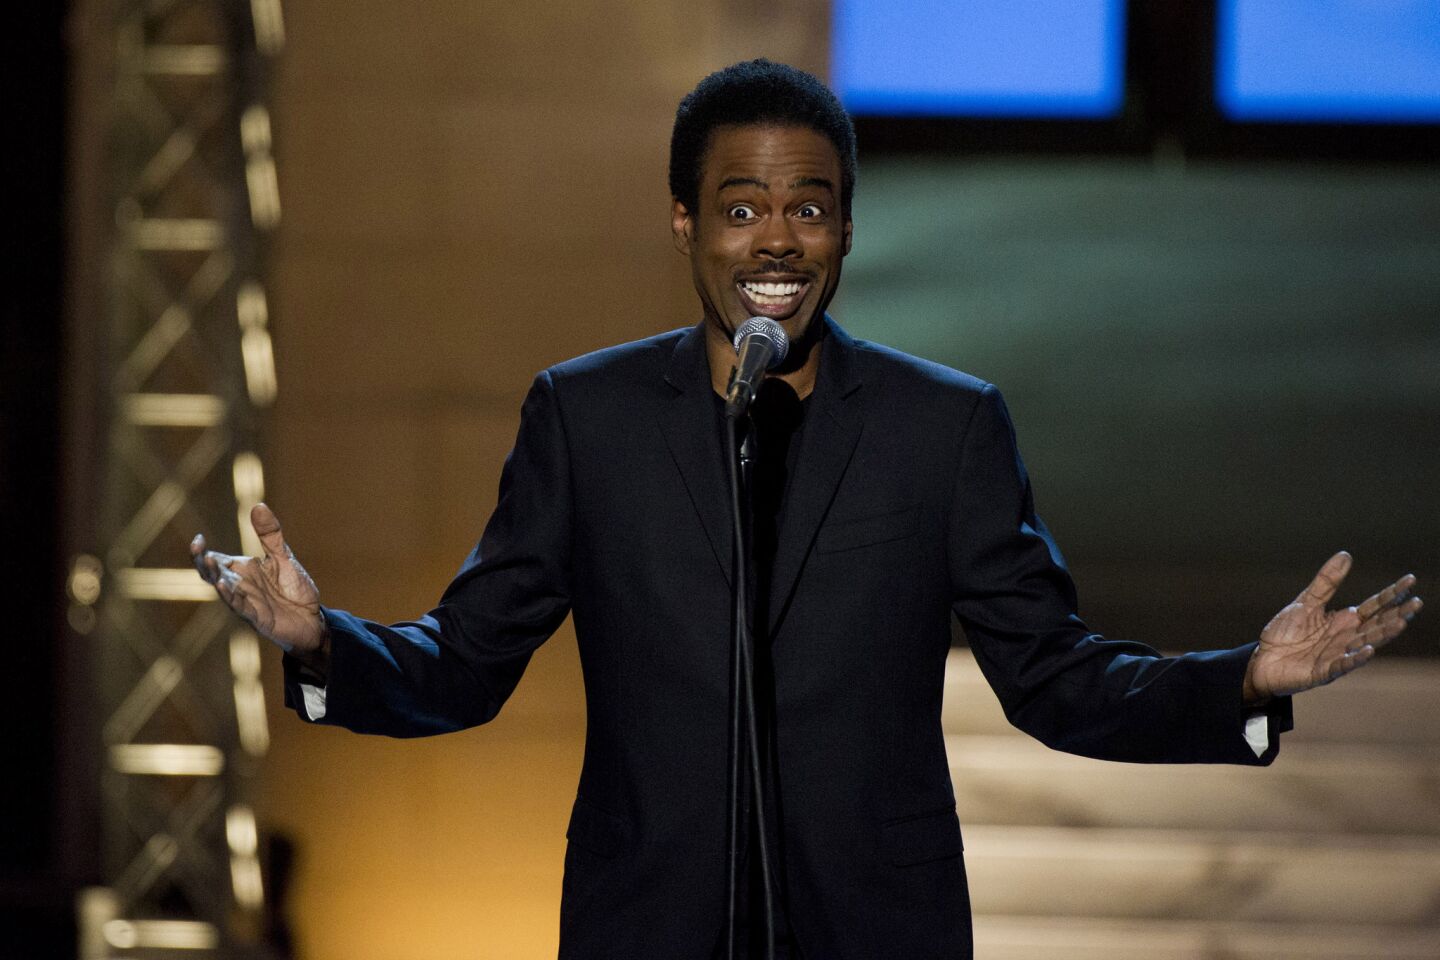 @chrisrock Now my name is Mca I've got a license to kill I think you know what time it is it's time to get ill. Now what do have ...http://say.ly/iKm3eCI